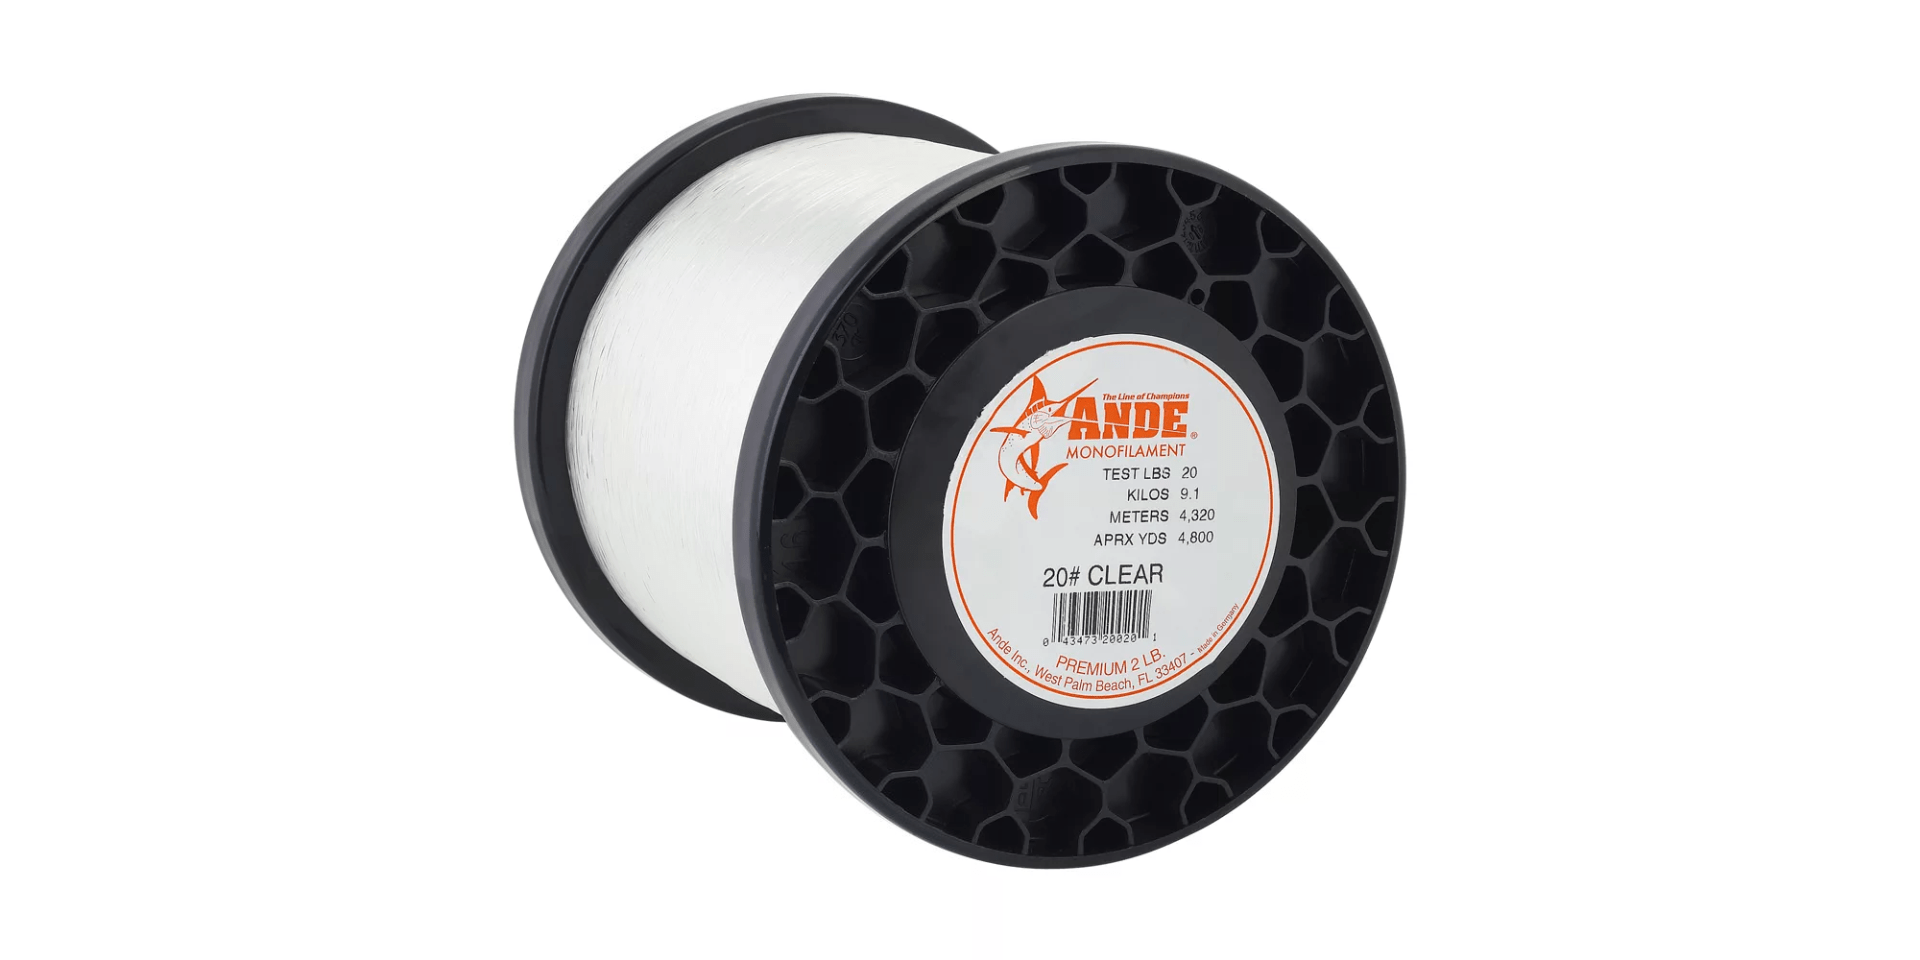 1640FT 20lb Nylon Fishing Line 8.0# Monofilament String Wire Fluorocarbon  Clear